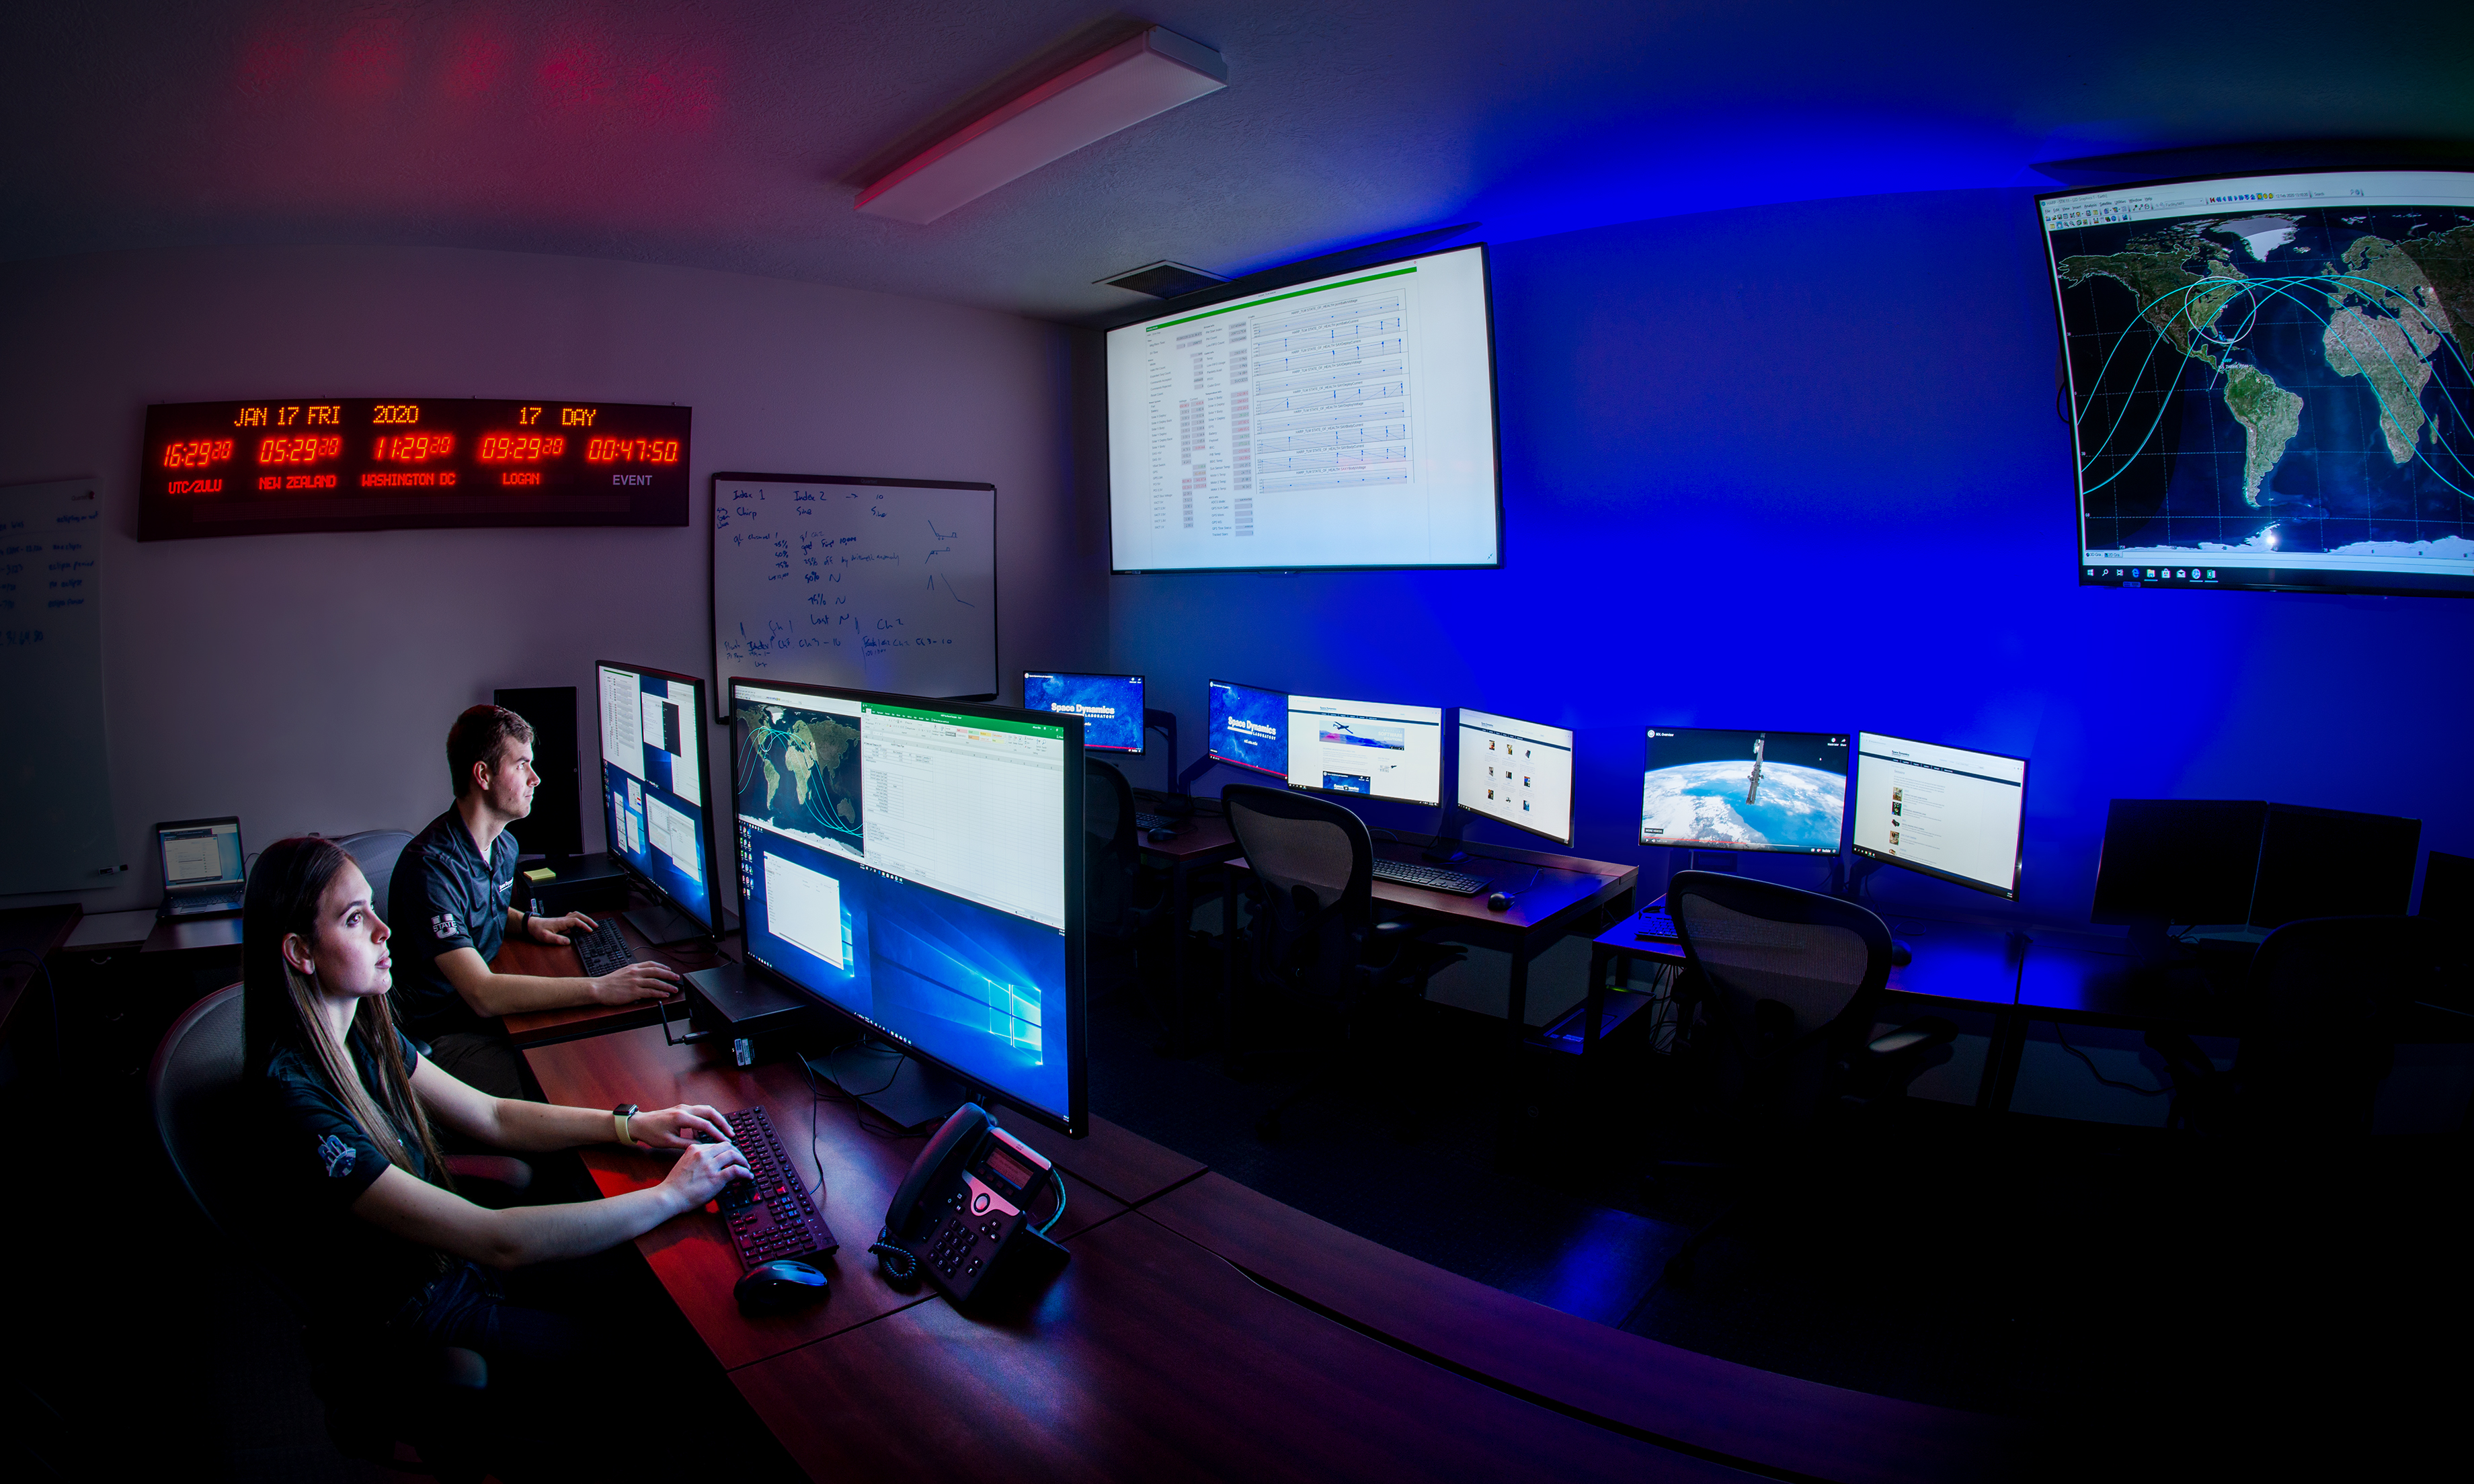 Space Dynamics Laboratory small satellite operators are shown in this January 17, 2020 photo at the controls of one of SDL’s Mission Operations Centers. (Credit: Space Dynamics Laboratory/Allison Bills)